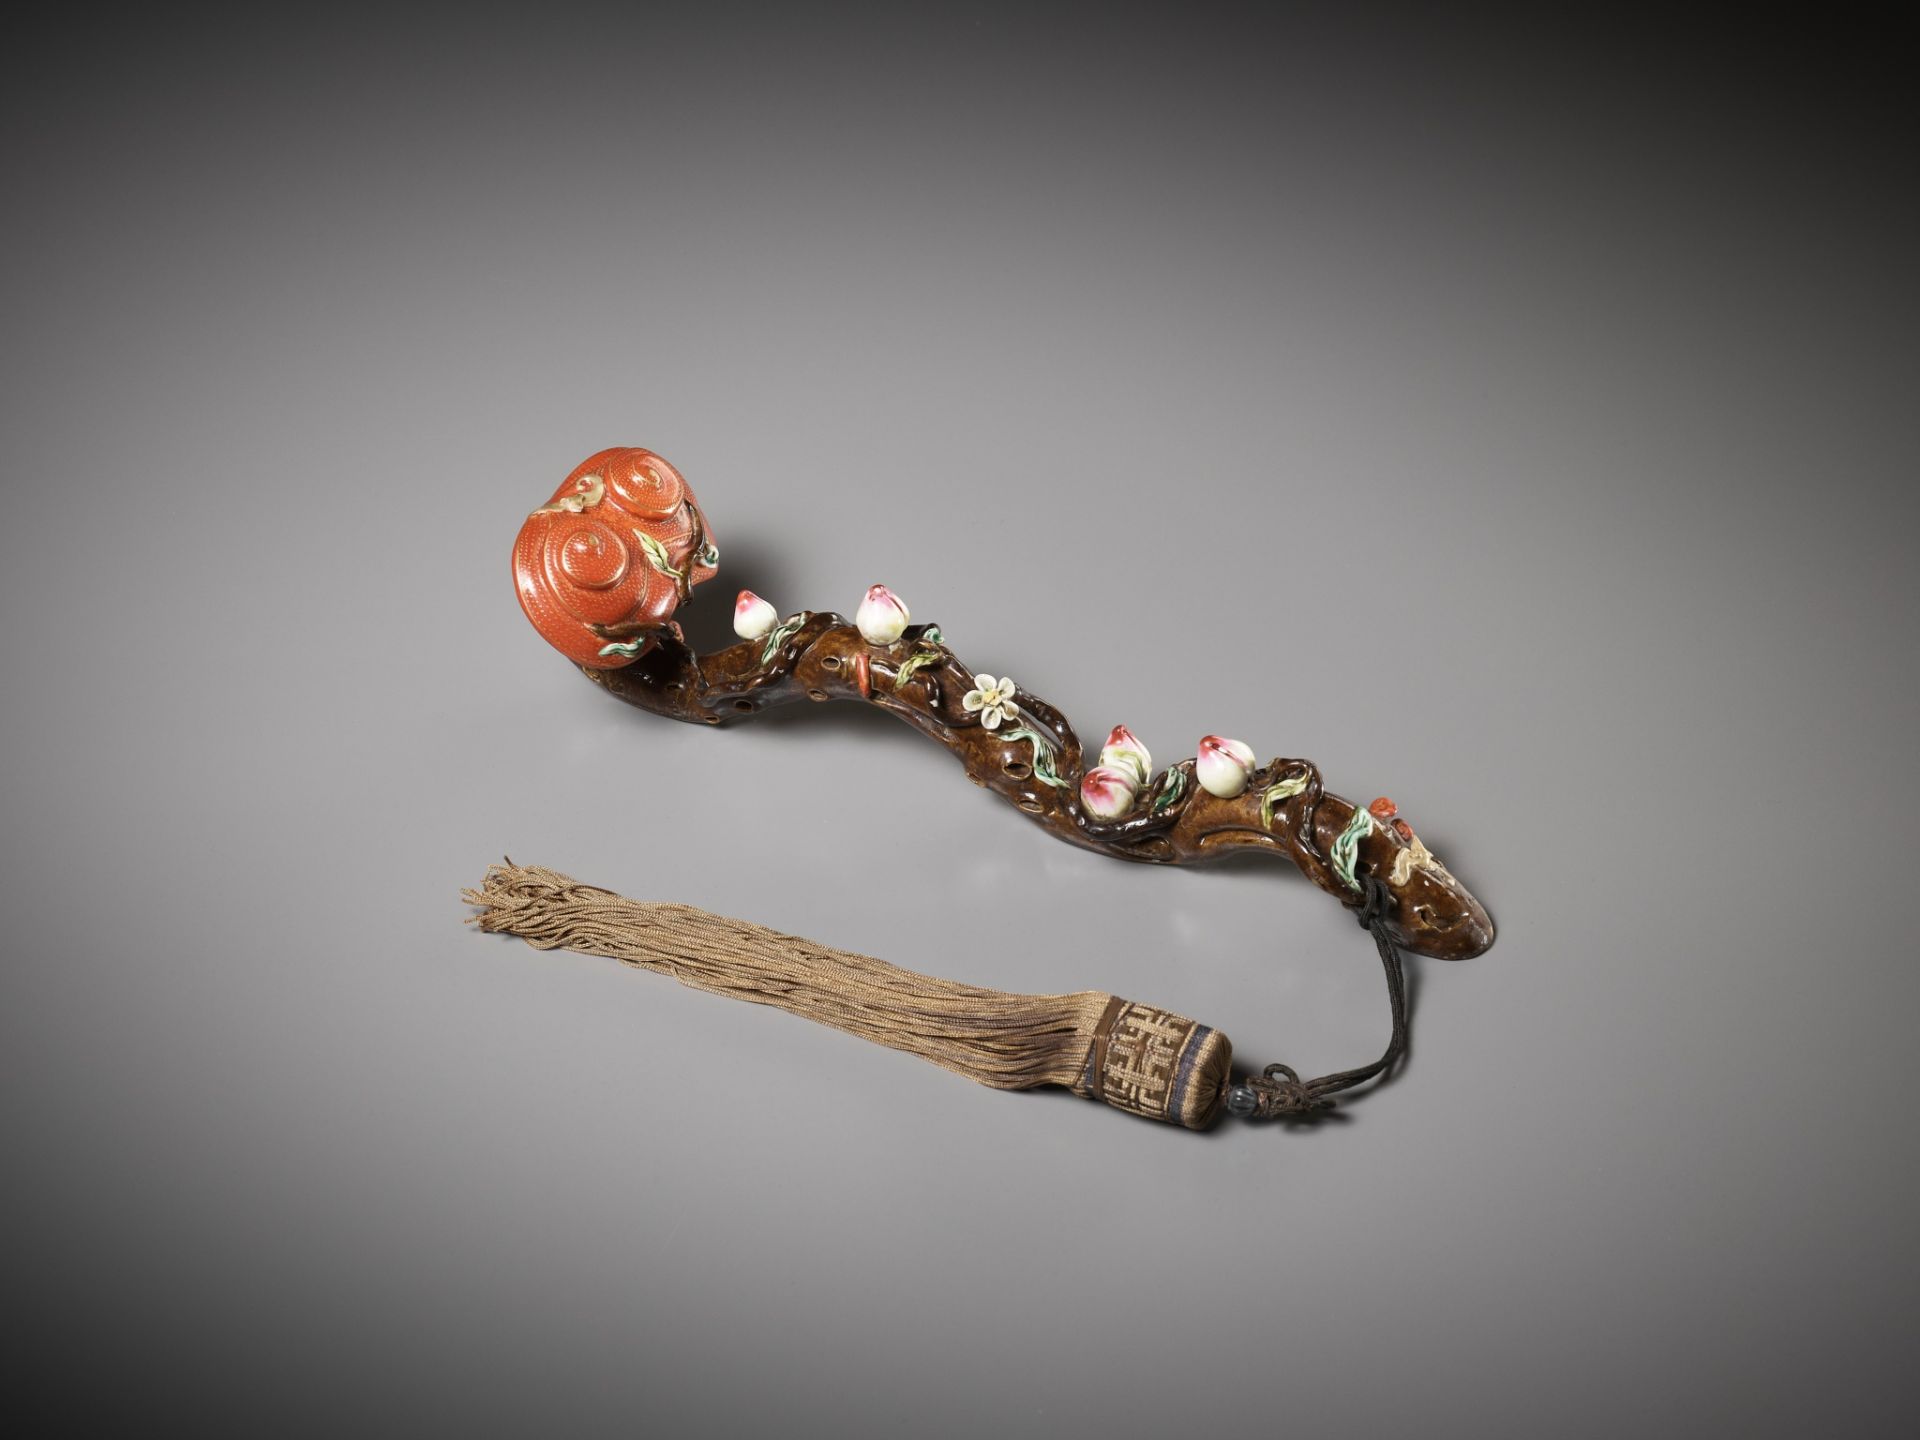 A FAMILLE ROSE PORCELAIN 'LINGZHI' RUYI SCEPTER, MID-QING DYNASTY - Image 9 of 12